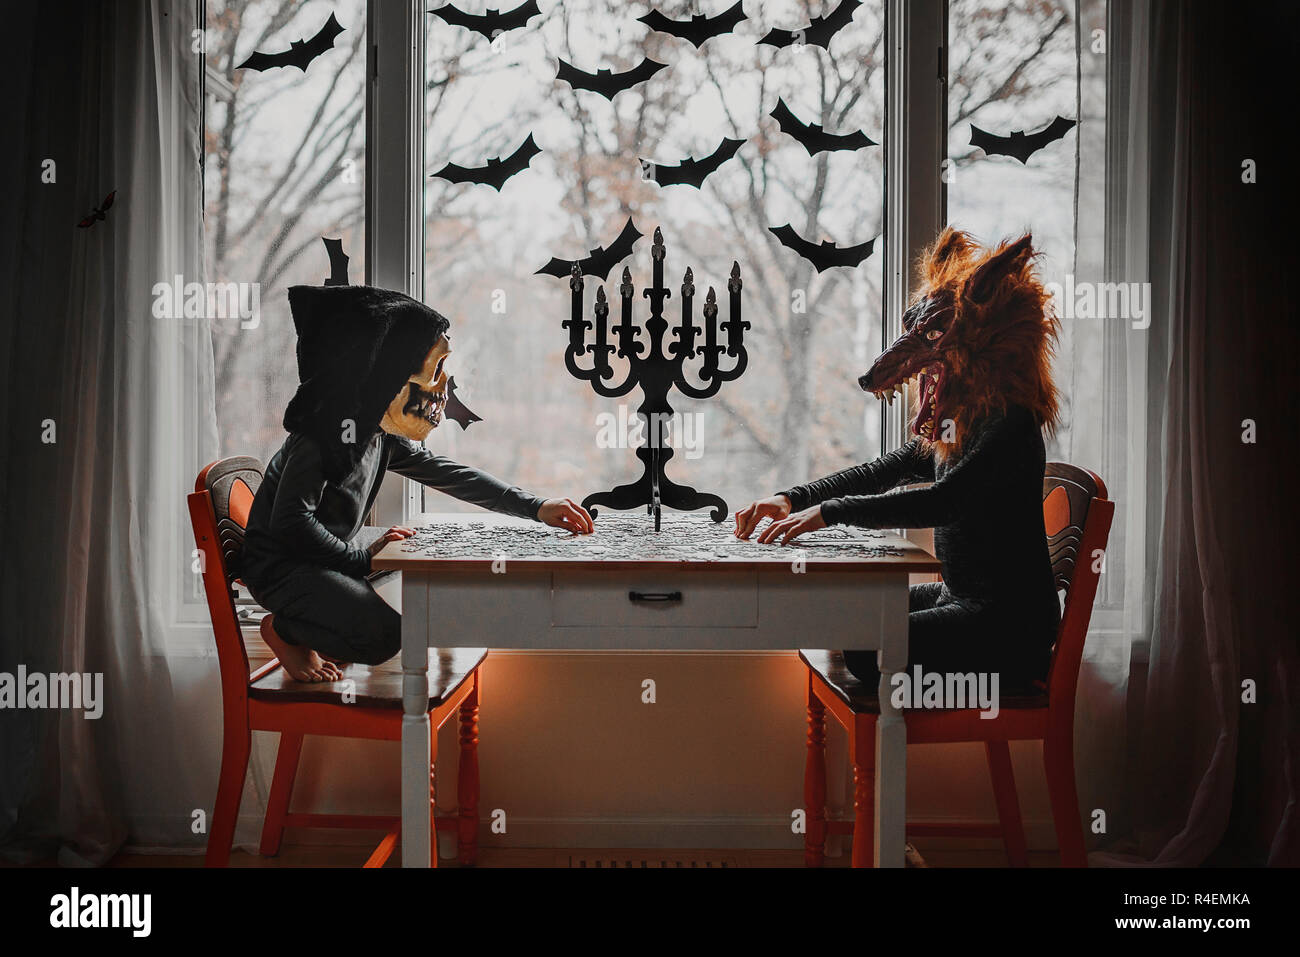 Two children in Halloween costumes sitting by a window doing a puzzle, United States Stock Photo